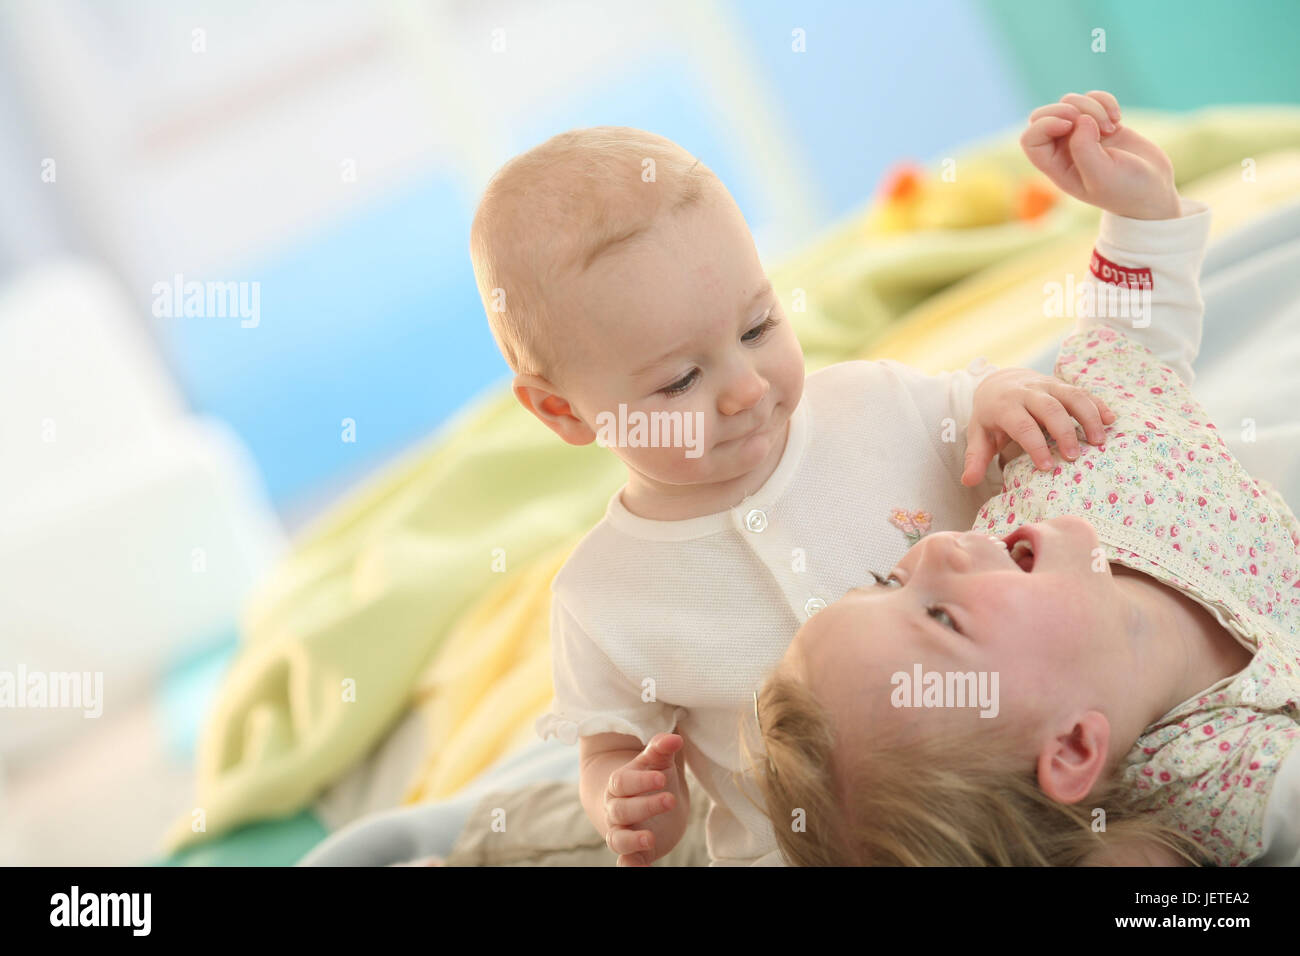 Siblings, baby, 5 months, infant, 2.5 years, play, Stock Photo